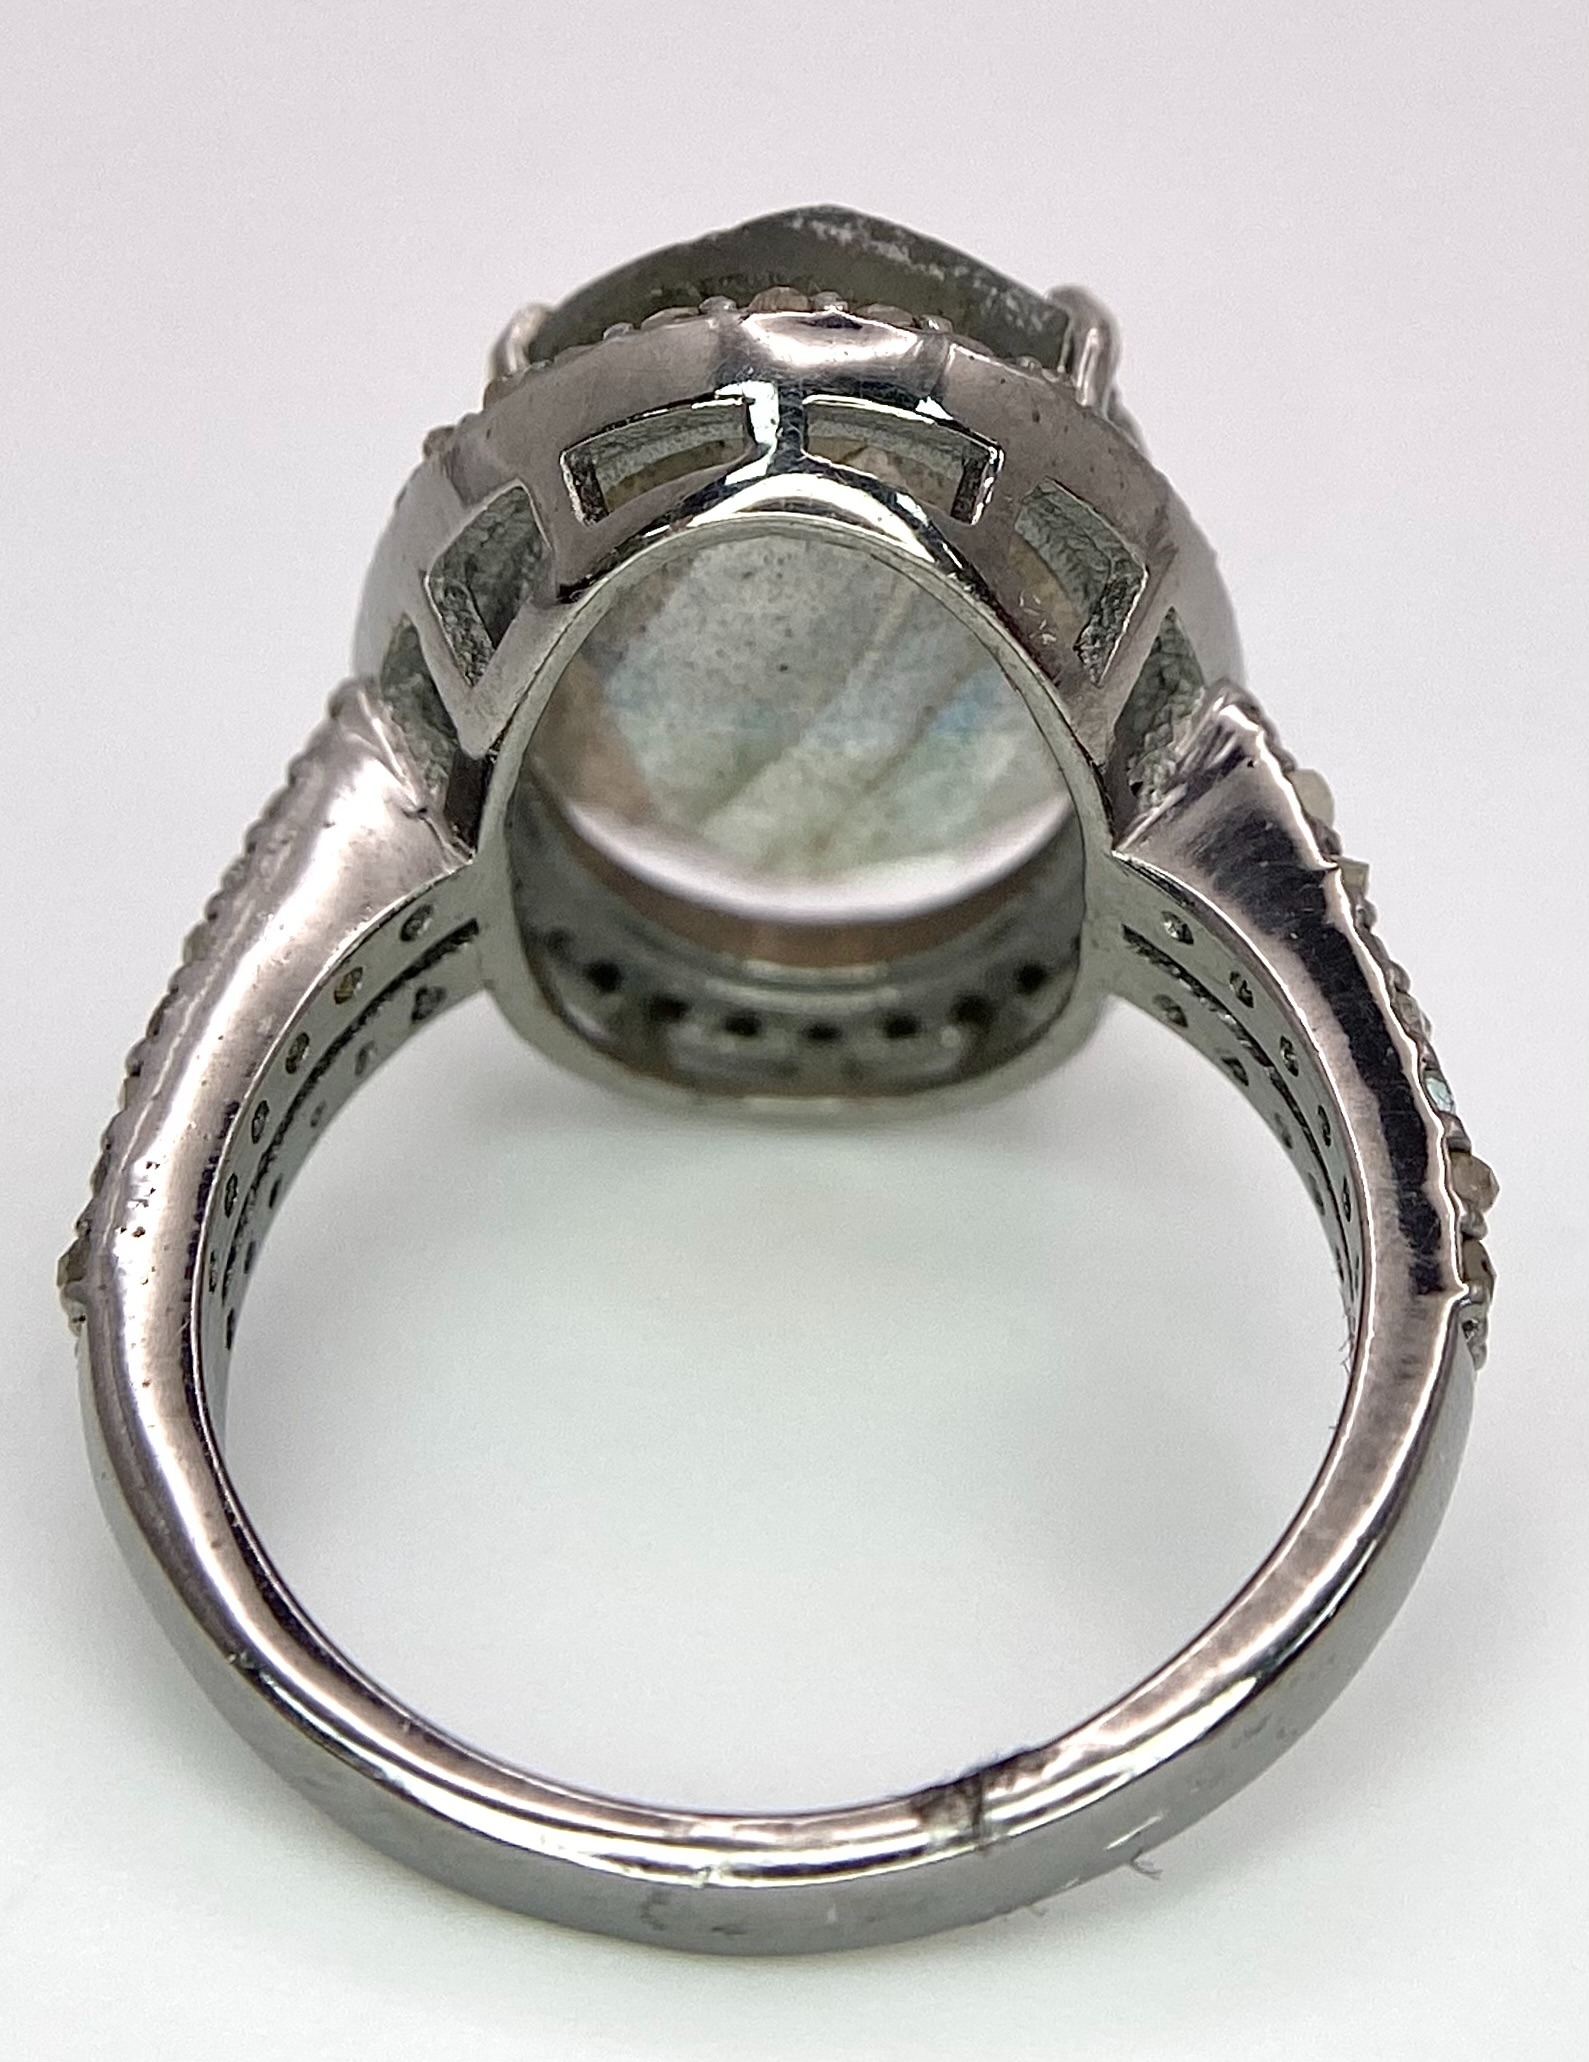 A 6.5ct Labradorite and Rose cut Diamond Ring. Diamonds- 0.60ctw. Size N. Comes with a - Image 7 of 7